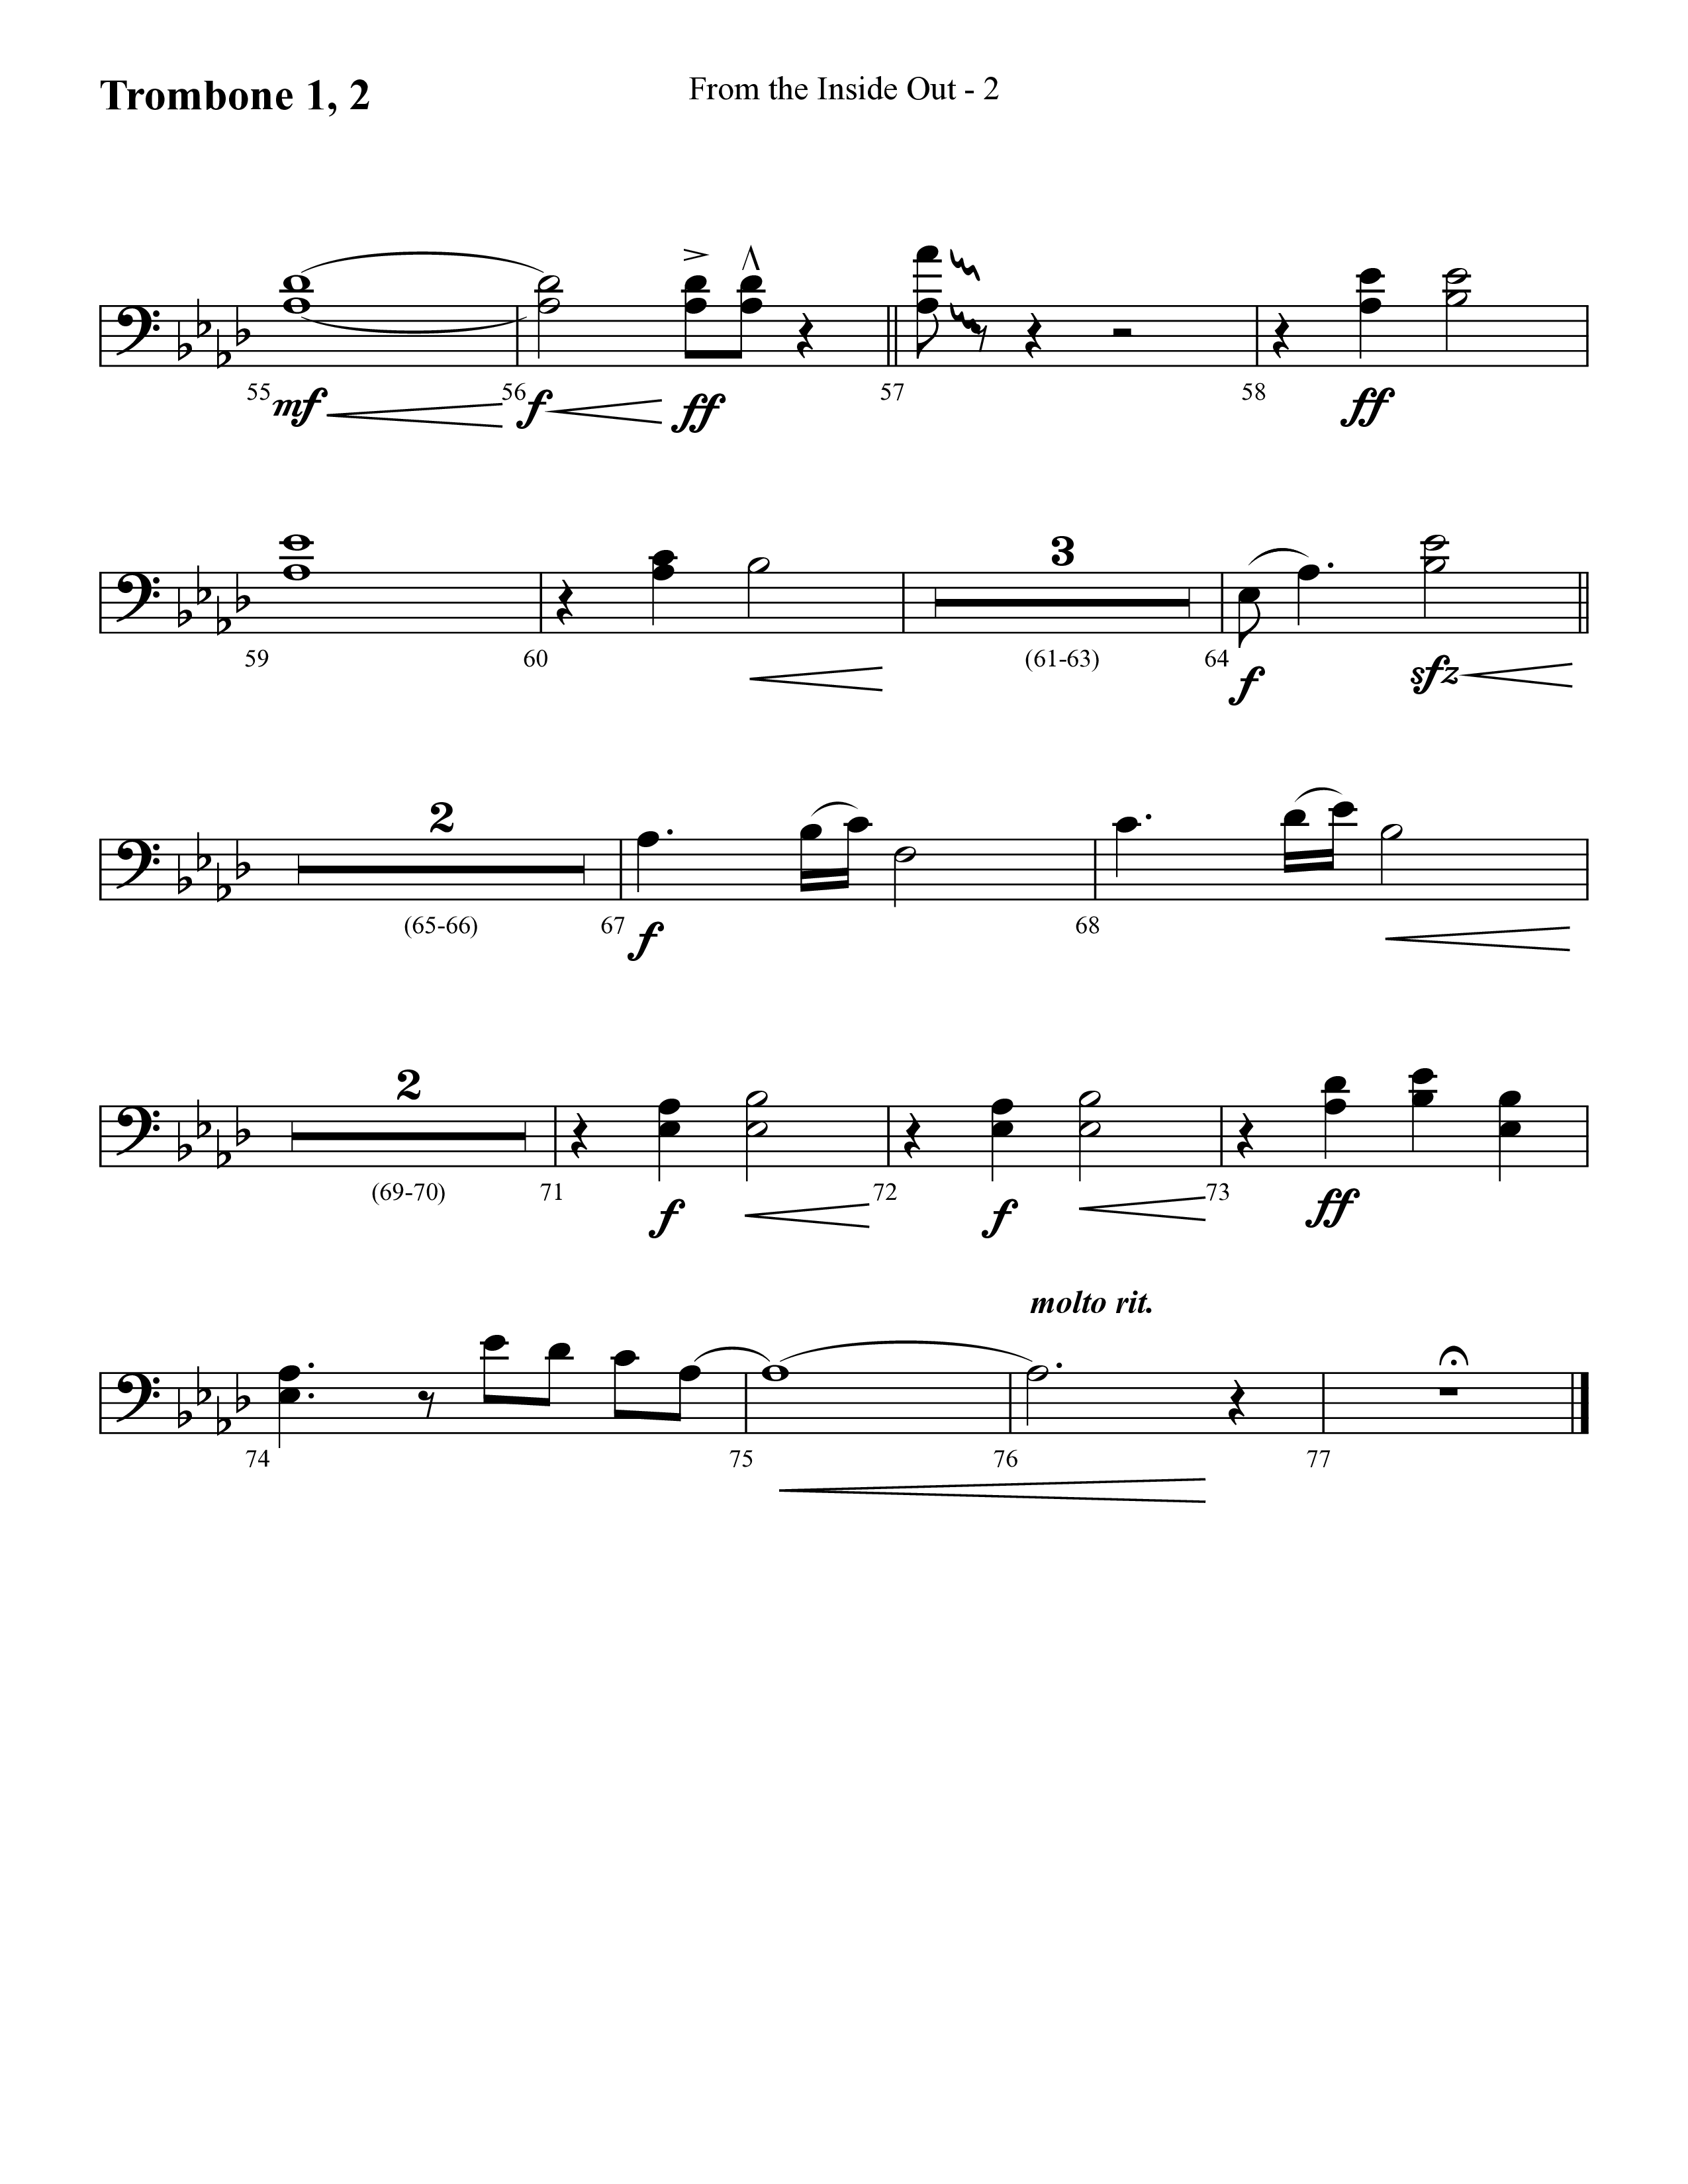 From The Inside Out (Choral Anthem SATB) Trombone 1/2 (Lifeway Choral / Arr. Cliff Duren)